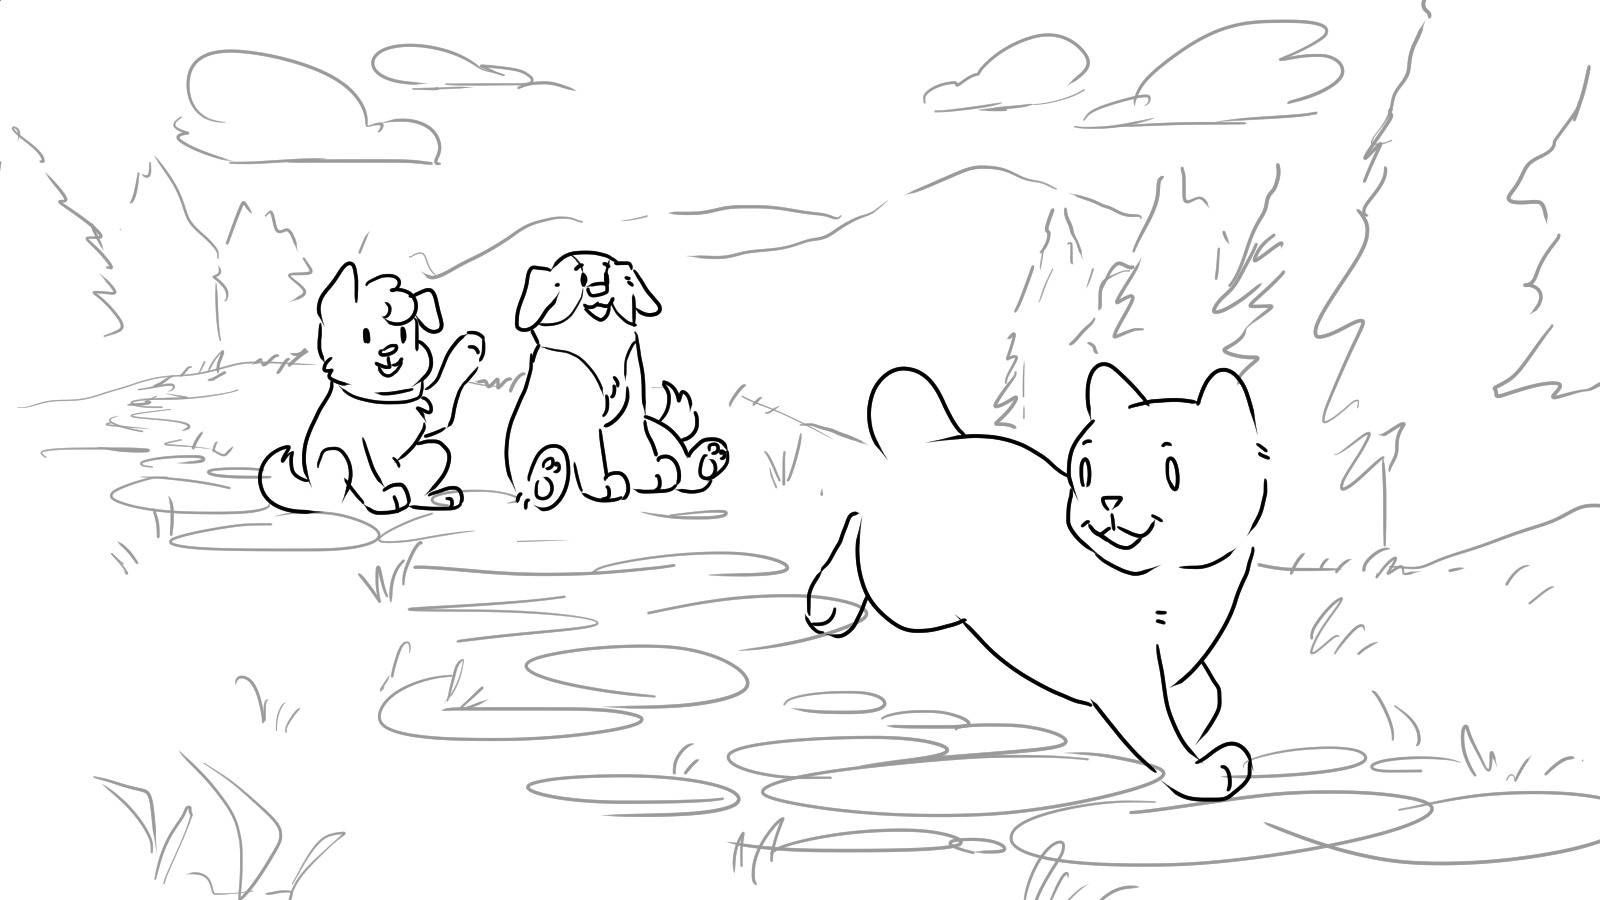 Bo depicted running down a stone path while looking back at Rex and Jack